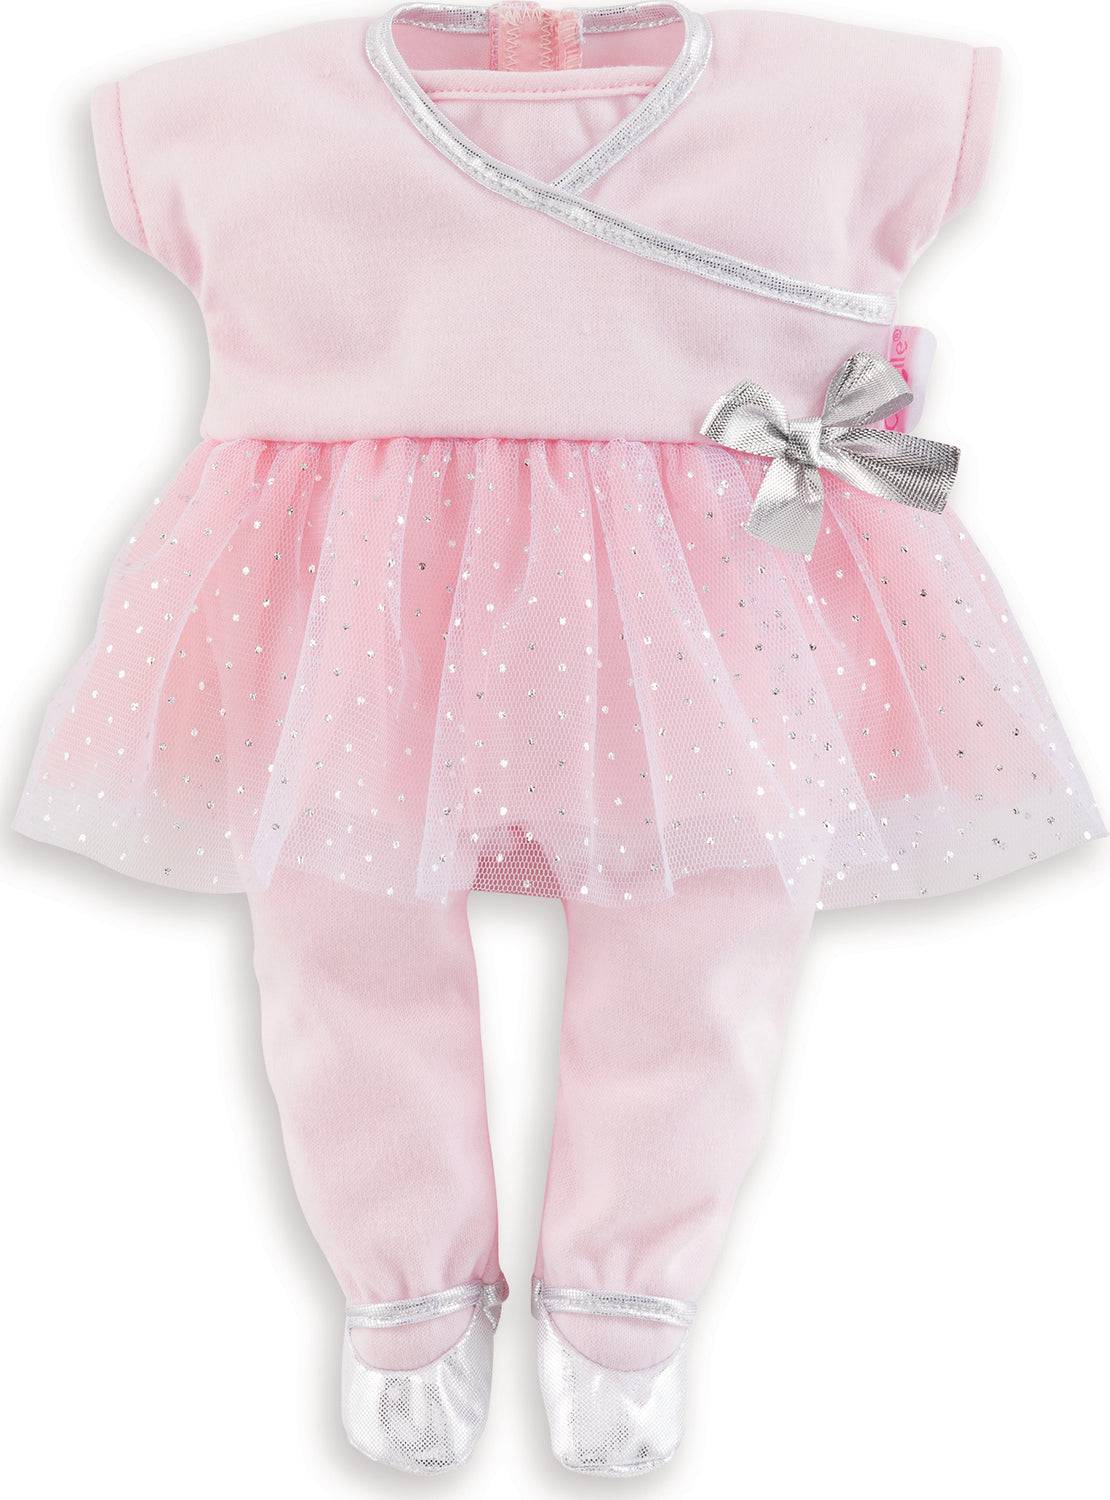 Sports Dance Outfit 14" - A Child's Delight